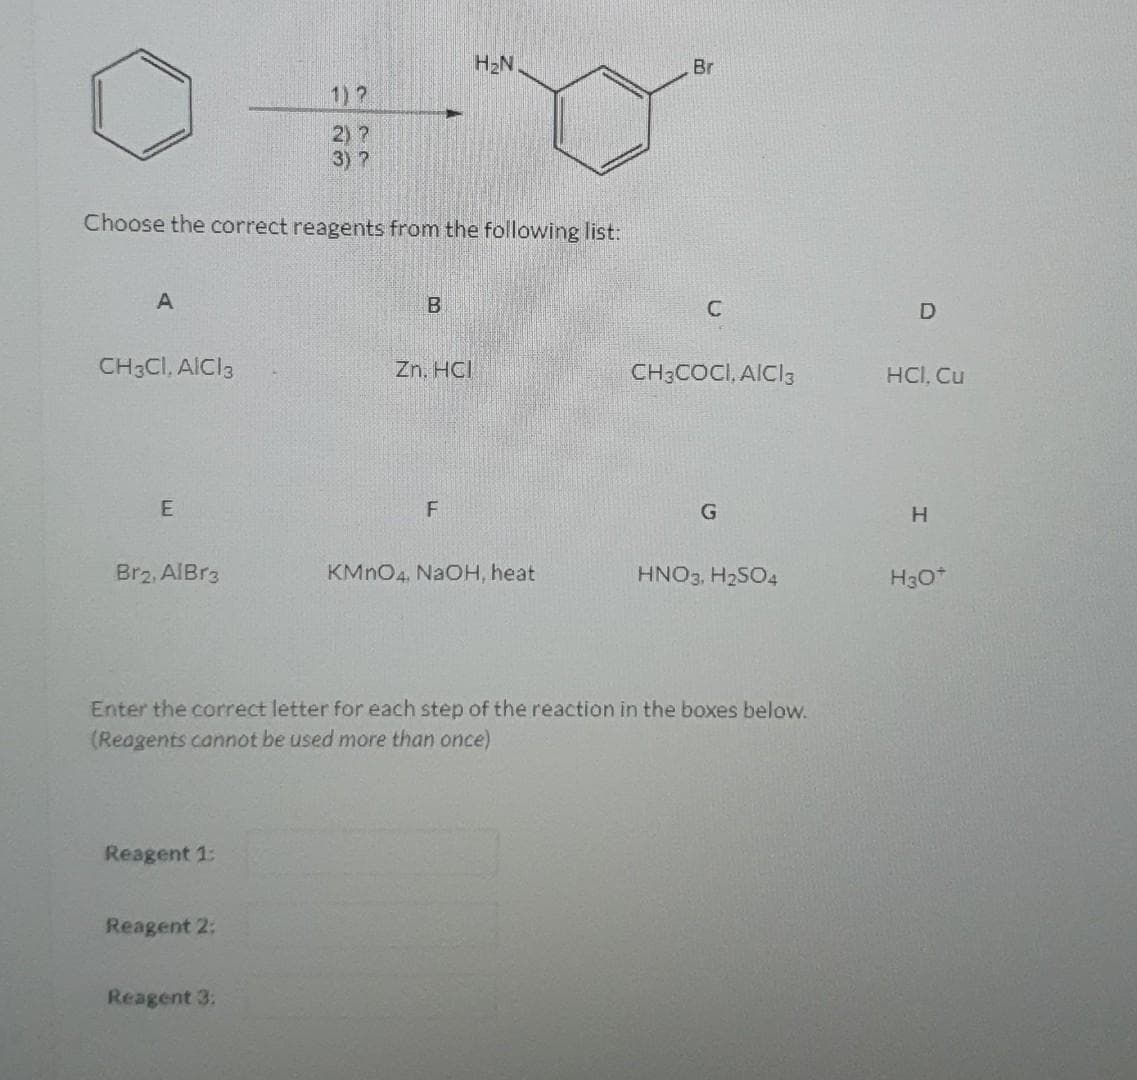 A
Choose the correct reagents from the following list:
CH3CI, AICI 3
E
Brz, AlBr3
Reagent 1:
1)?
2) ?
3) ?
Reagent 2:
Reagent 3:
B
Zn. HCI
H₂N
F
KMnO4, NaOH, heat
Br
Enter the correct letter for each step of the reaction in the boxes below.
(Reagents cannot be used more than once)
CH3COCI, AICI 3
HNO3, H₂SO4
D
HCl, Cu
H
H3O+